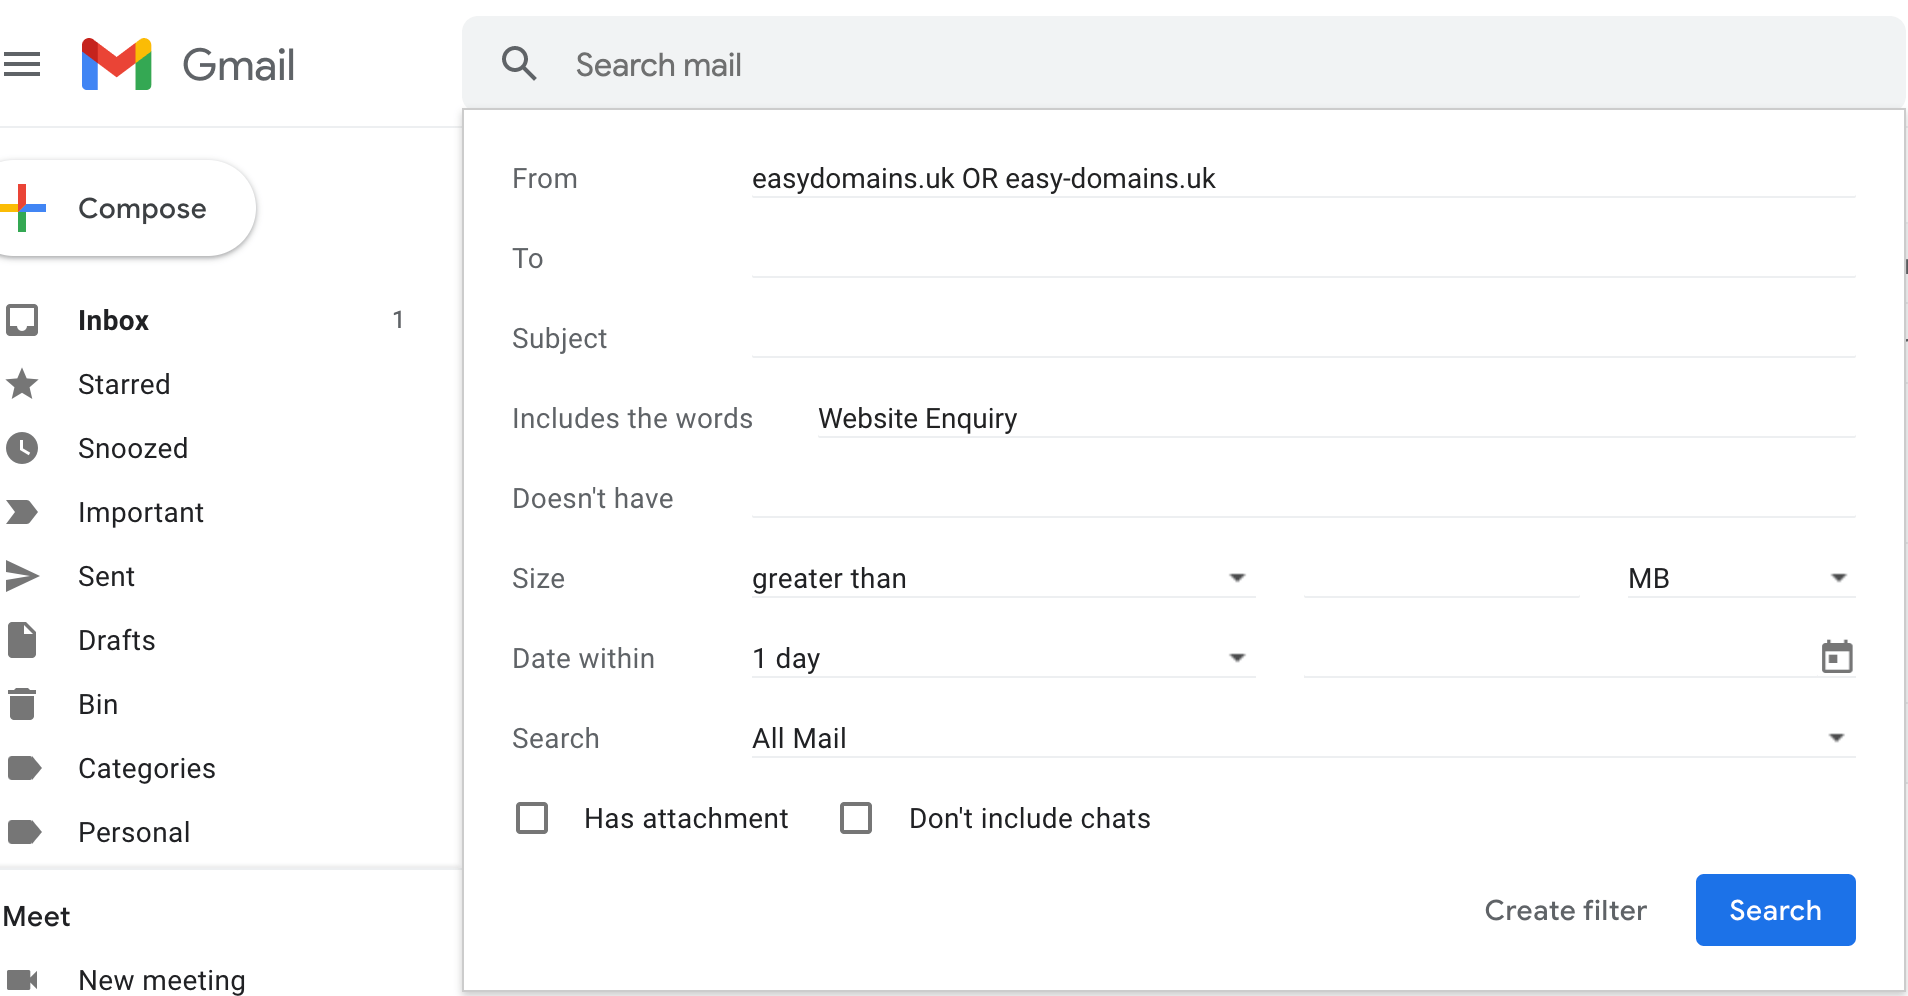 gmail-search-options.png